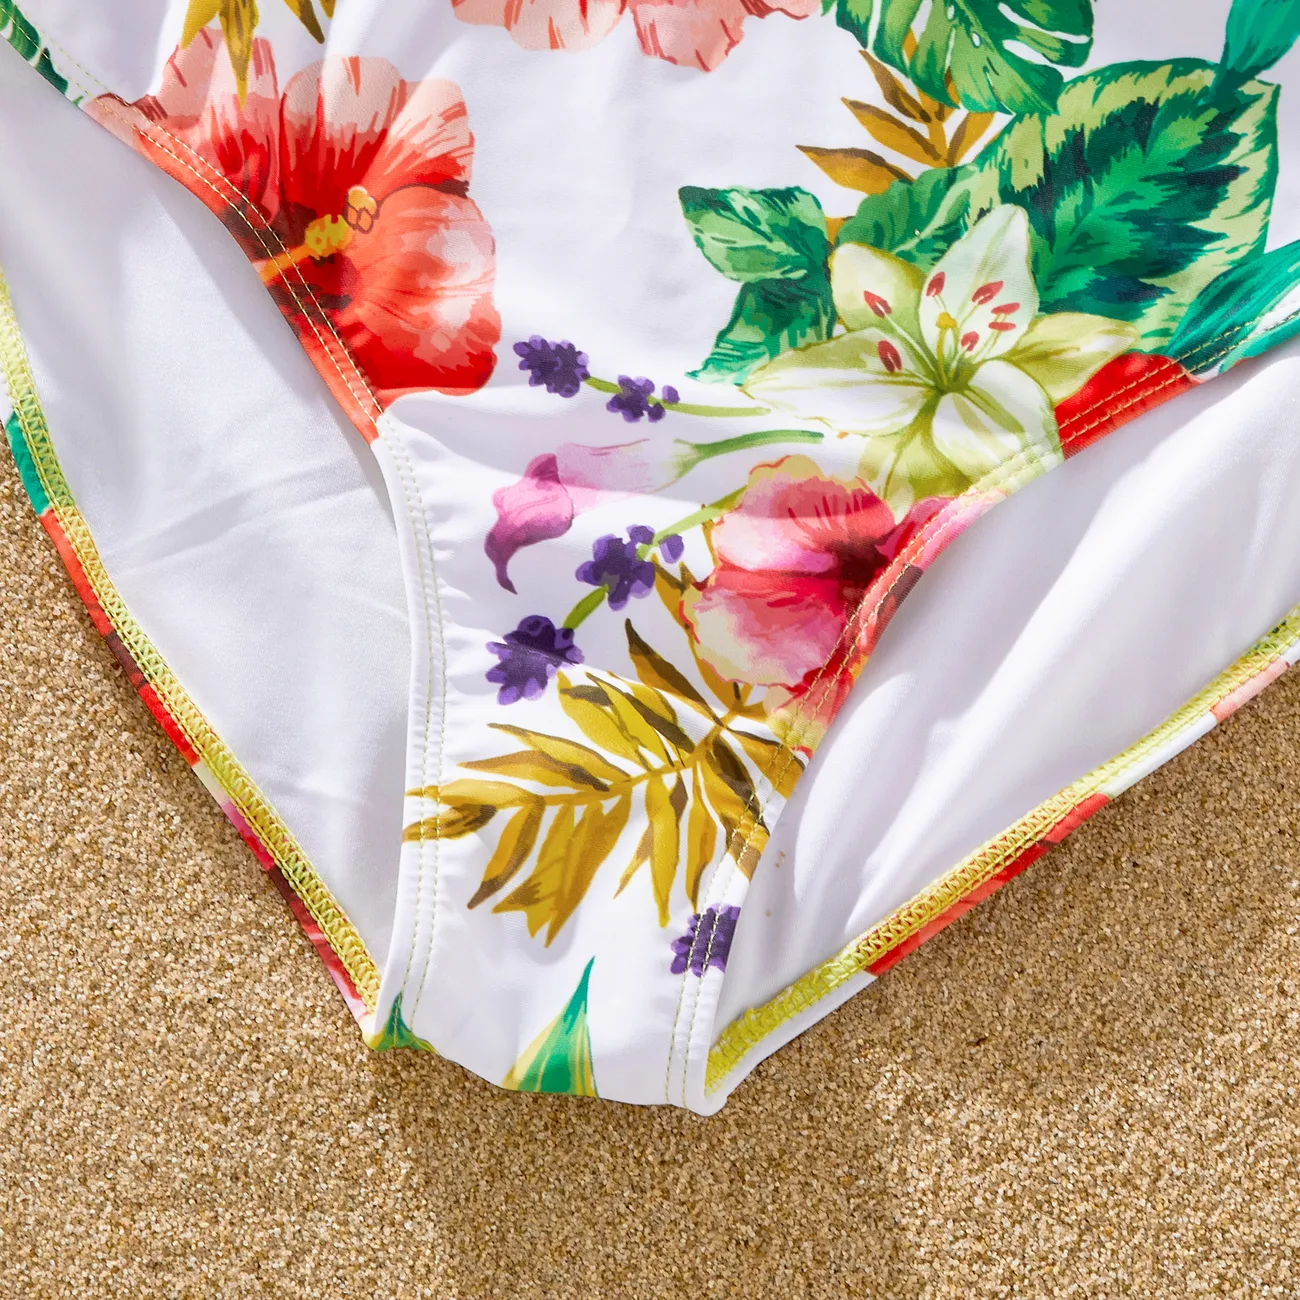 Family Matching Floral Drawstring Swim Trunks or Halter Tie Cross Front Swimsuit LightYellow big image 1